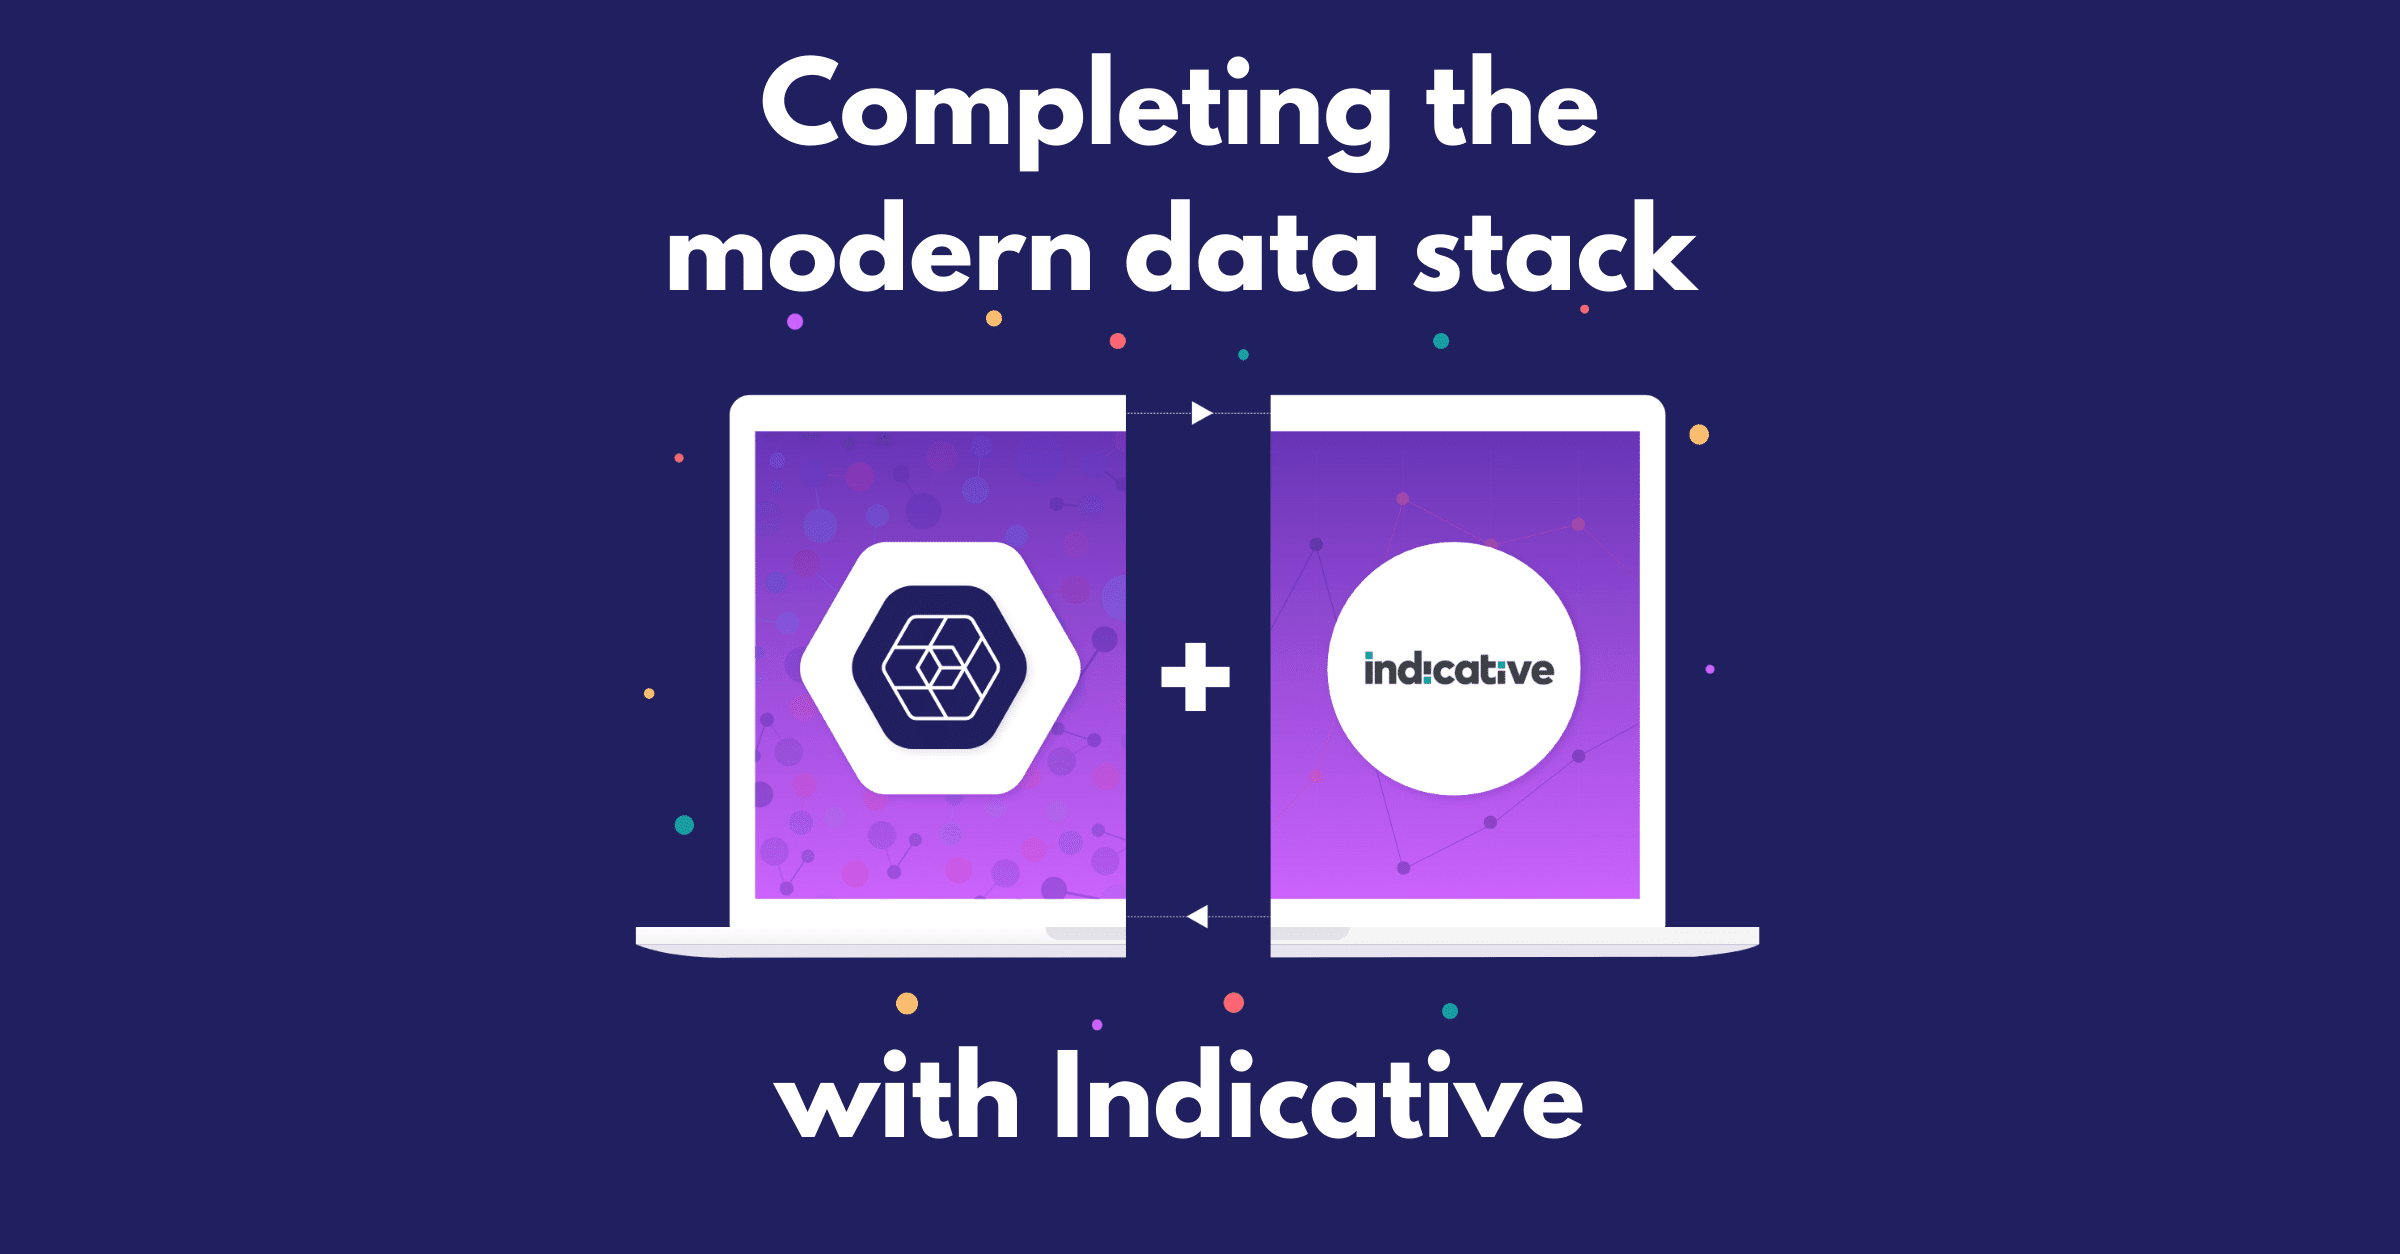 Completing the modern data stack with Indicative